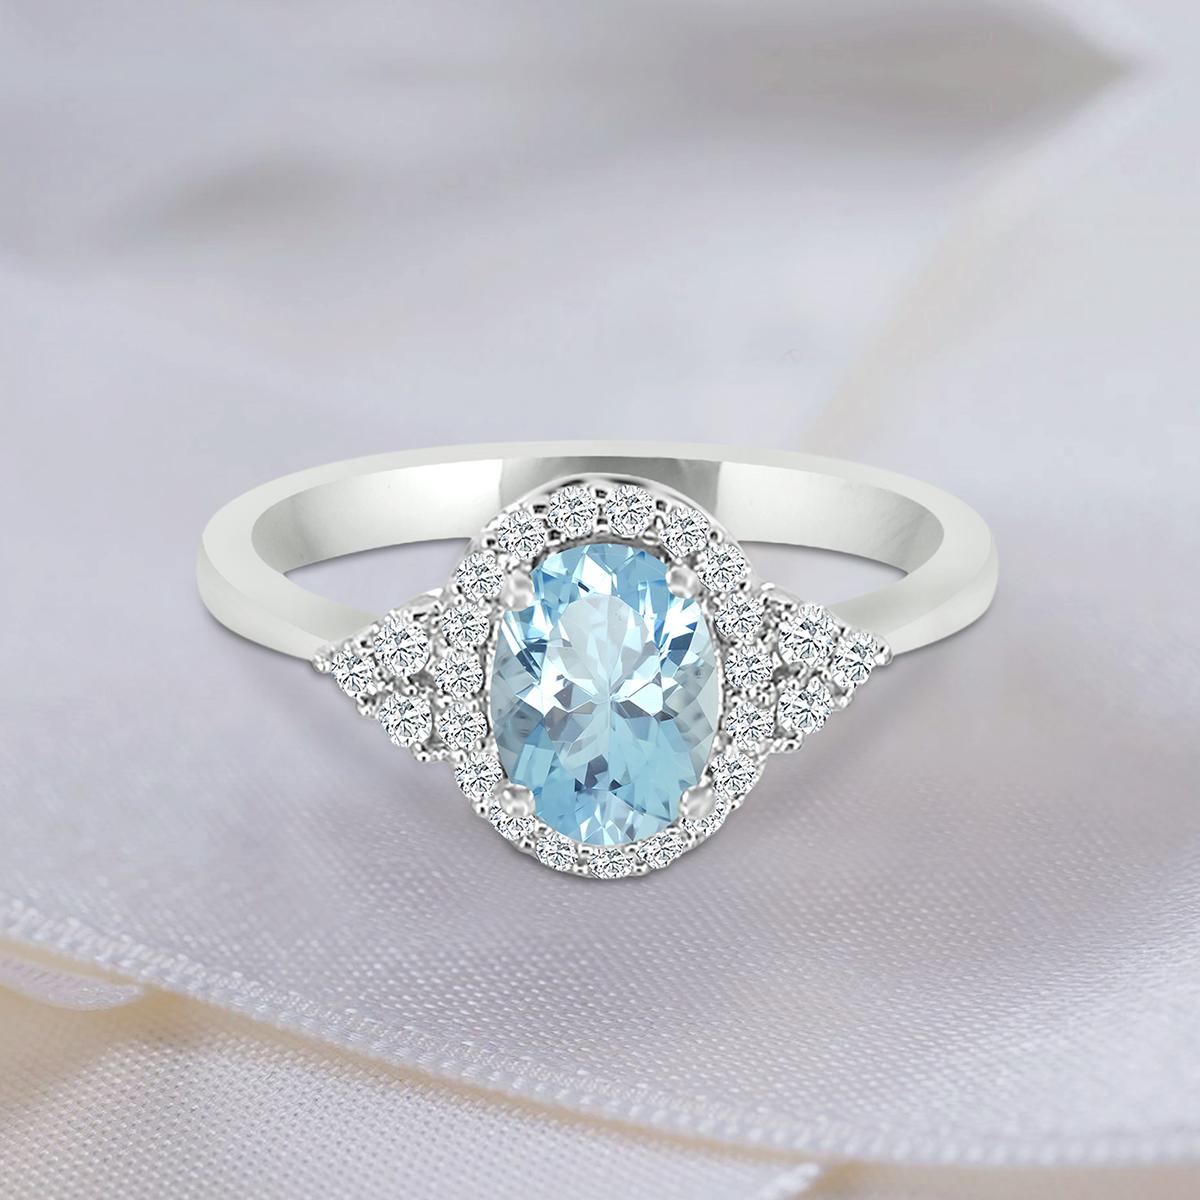 Get Her A Gift She Will Want To Wear Everyday. This Elegant Shade Of light Blue Is Perfect To Welcome In Spring - Plus, Its March's Birthstone.
This Classic Ring Showcases A Oval Shaped 7x5mm Aquamarine Gemstone Haloed By Sparkling